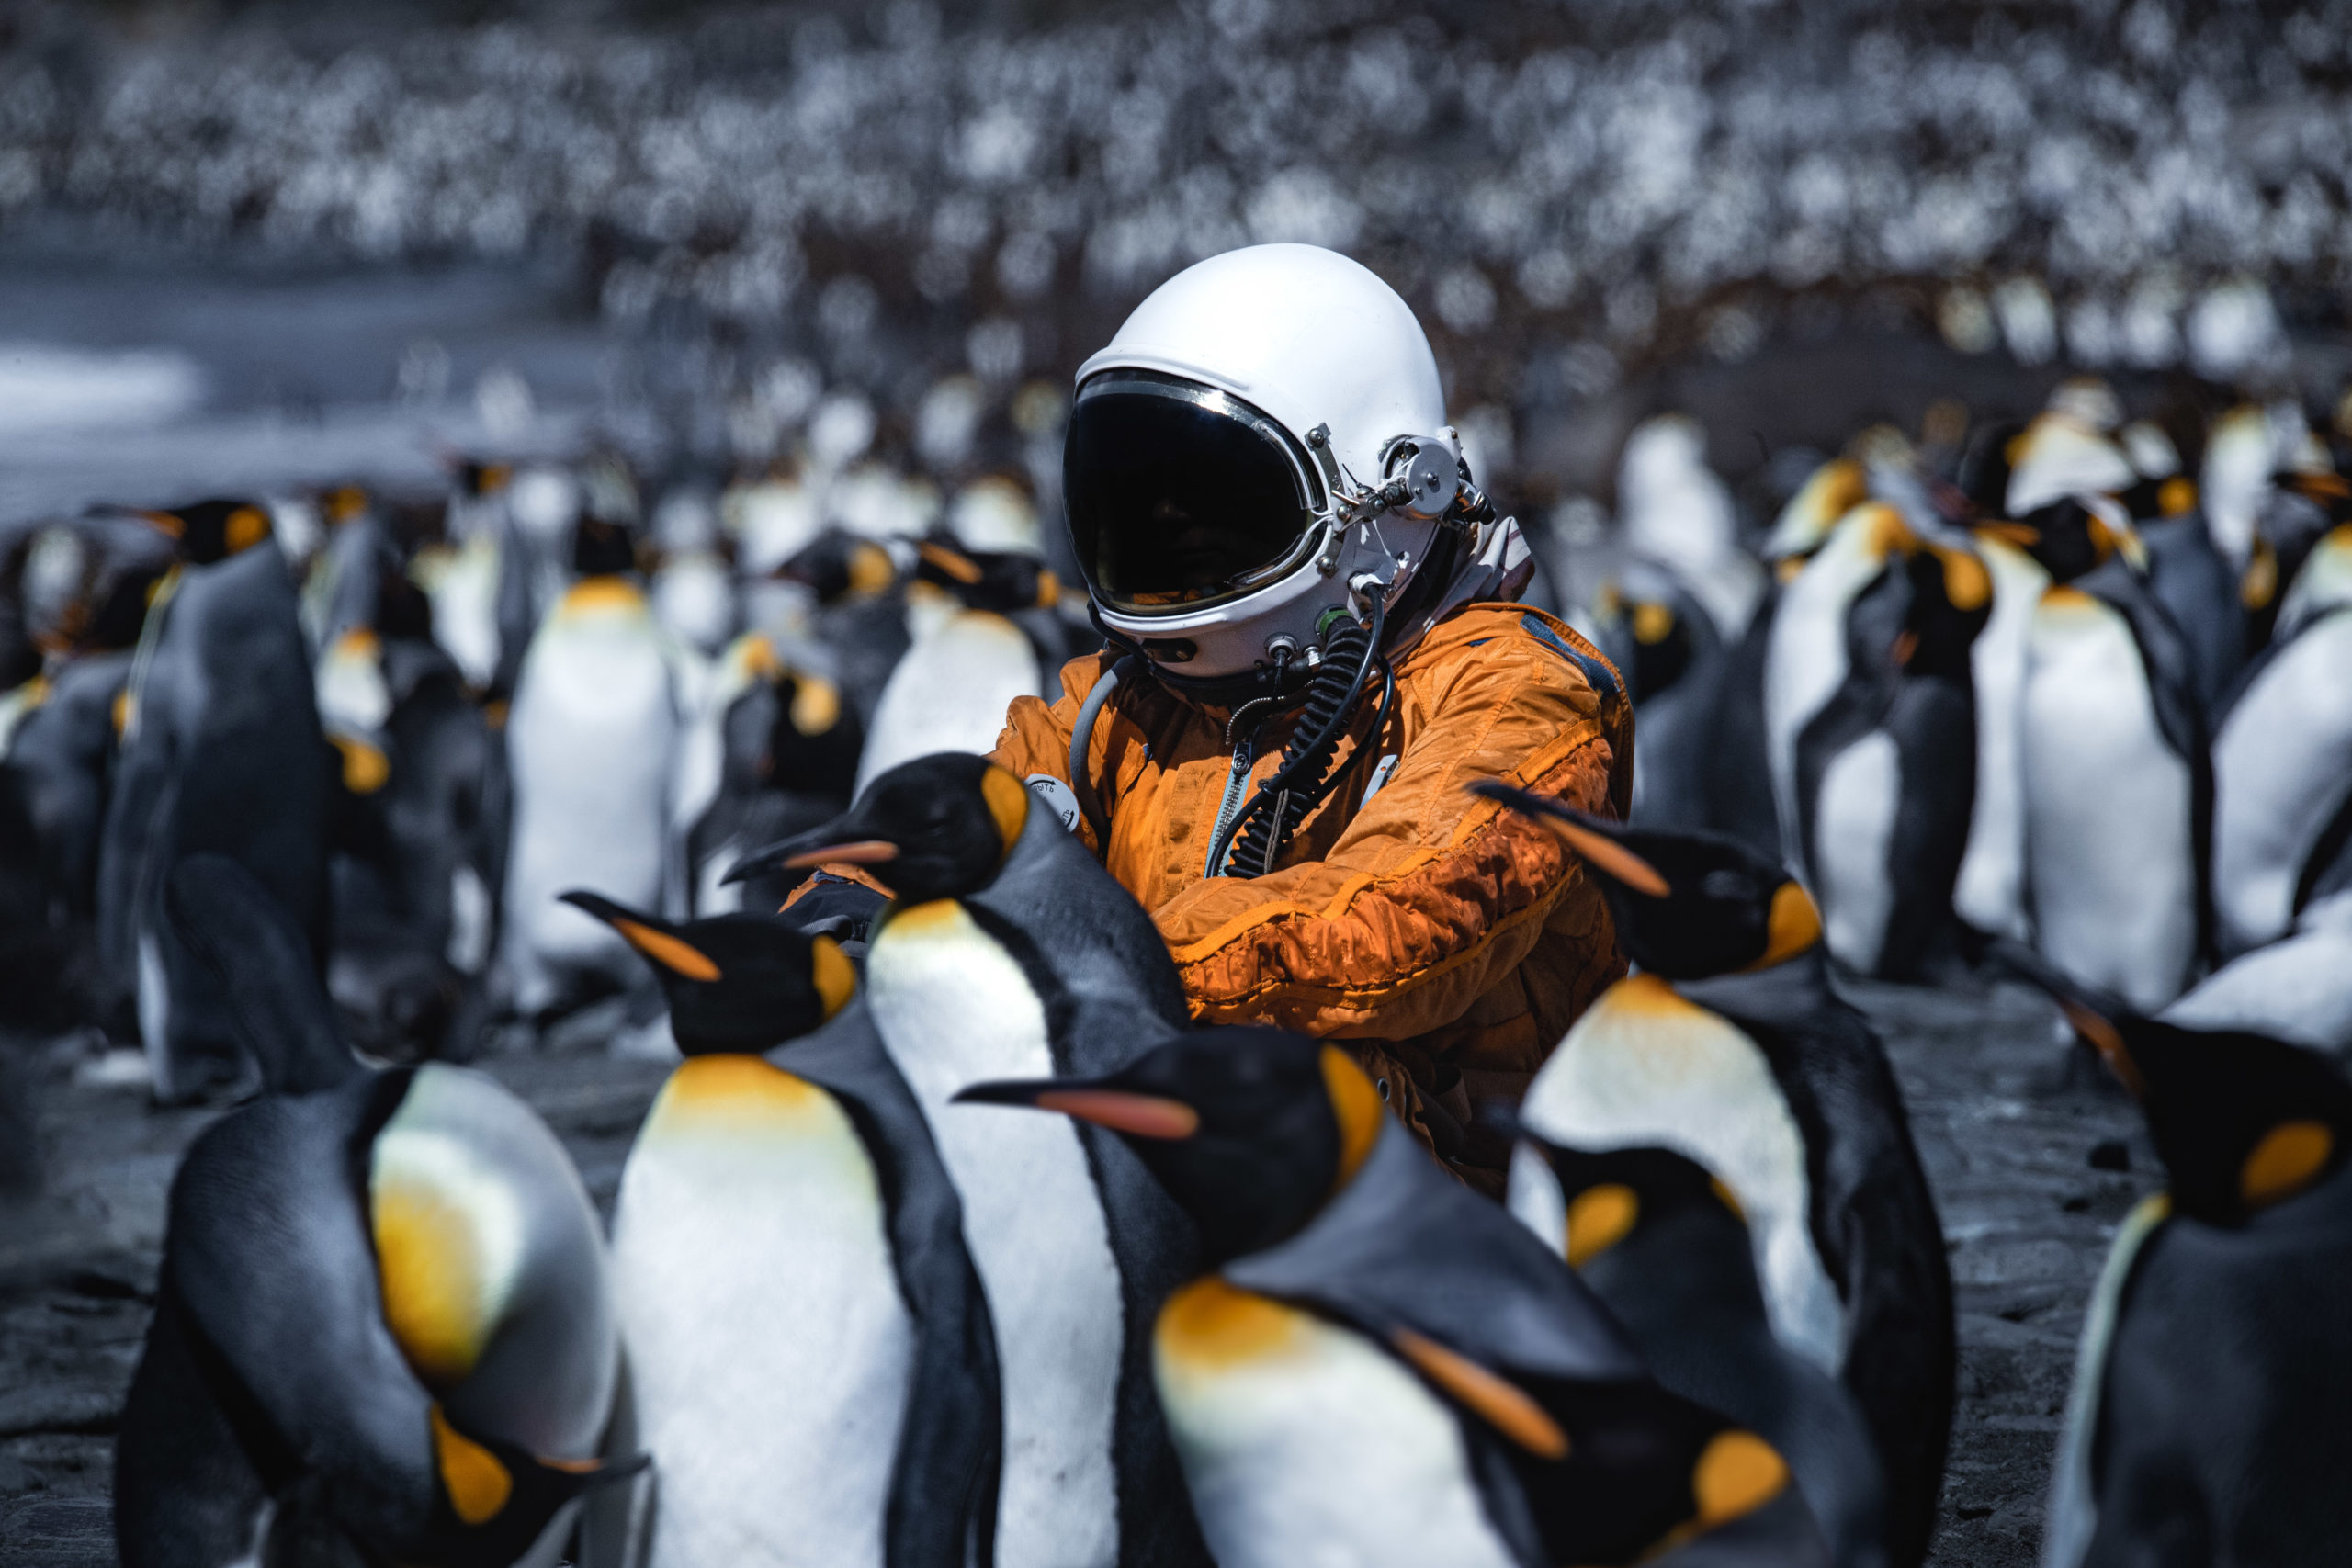 Photography of an astronaut at a colony of alien-like King Penguins on the otherworldly landscape of South Georgia Island near Antarctica.